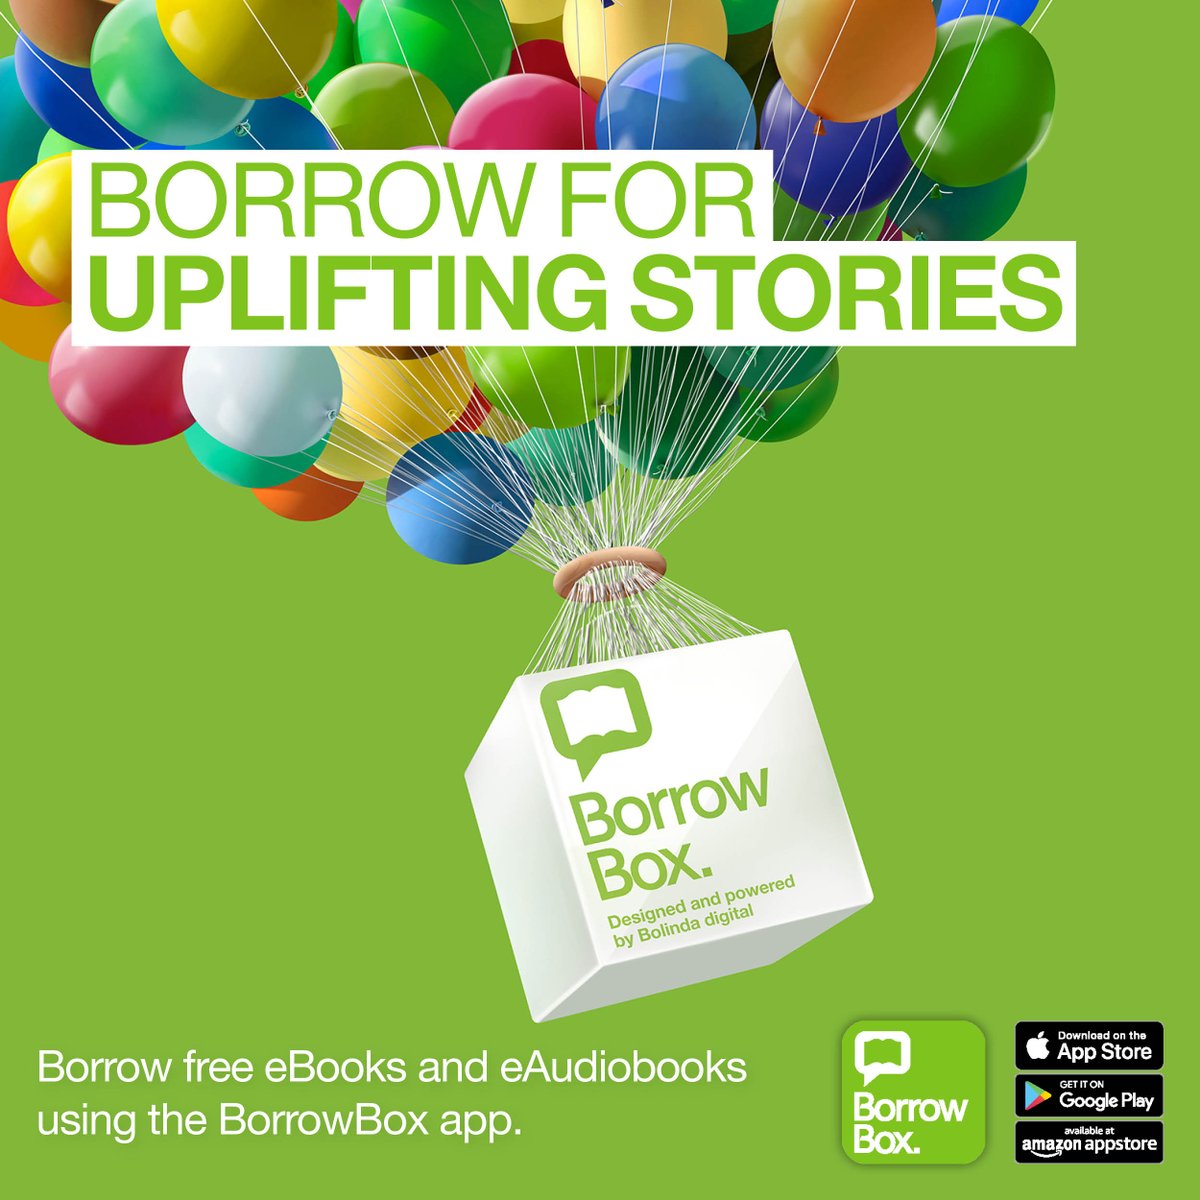 .@BorrowBox is here for uplifting stories. Use the @Borrowbox App or visit staffordshire.gov.uk/eLibrary for a fantastic range of eBooks & eAudio